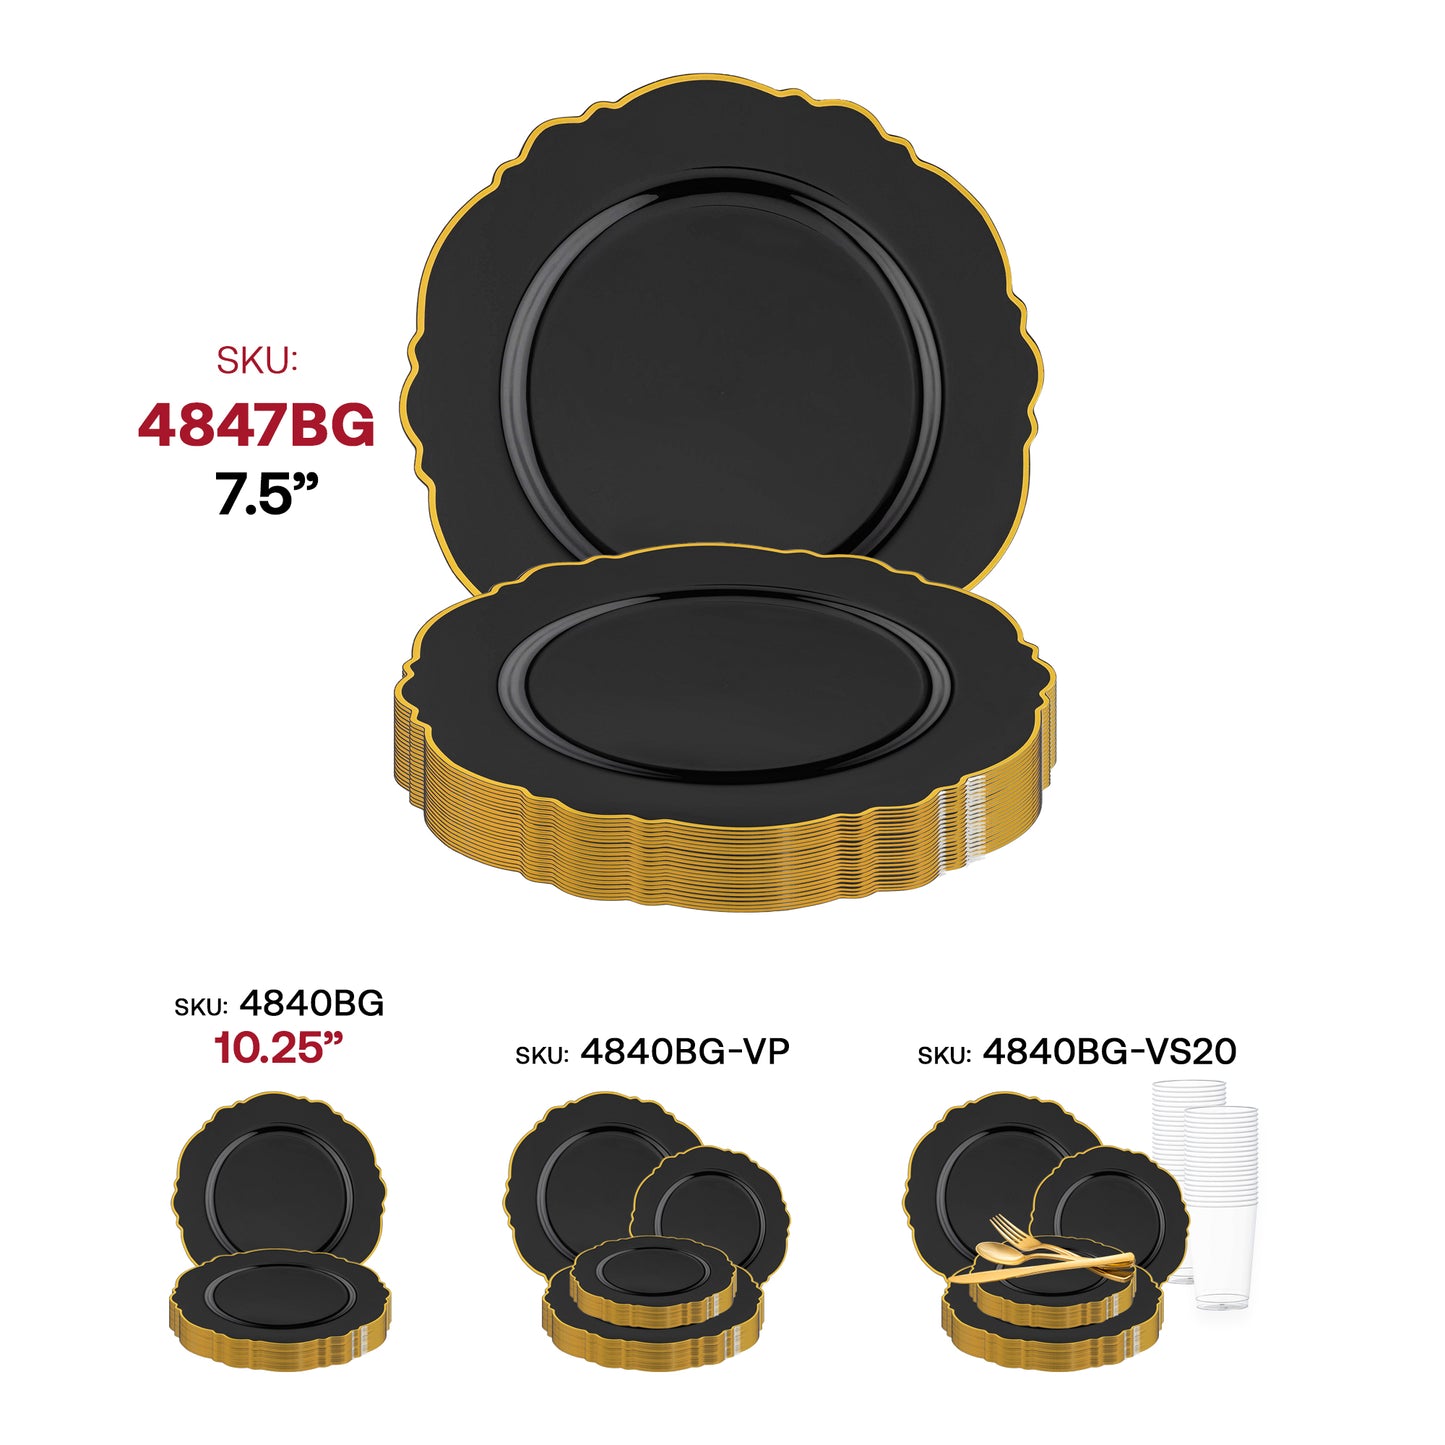 Black with Gold Rim Round Blossom Disposable Plastic Appetizer/Salad Plates (7.5") | The Kaya Collection